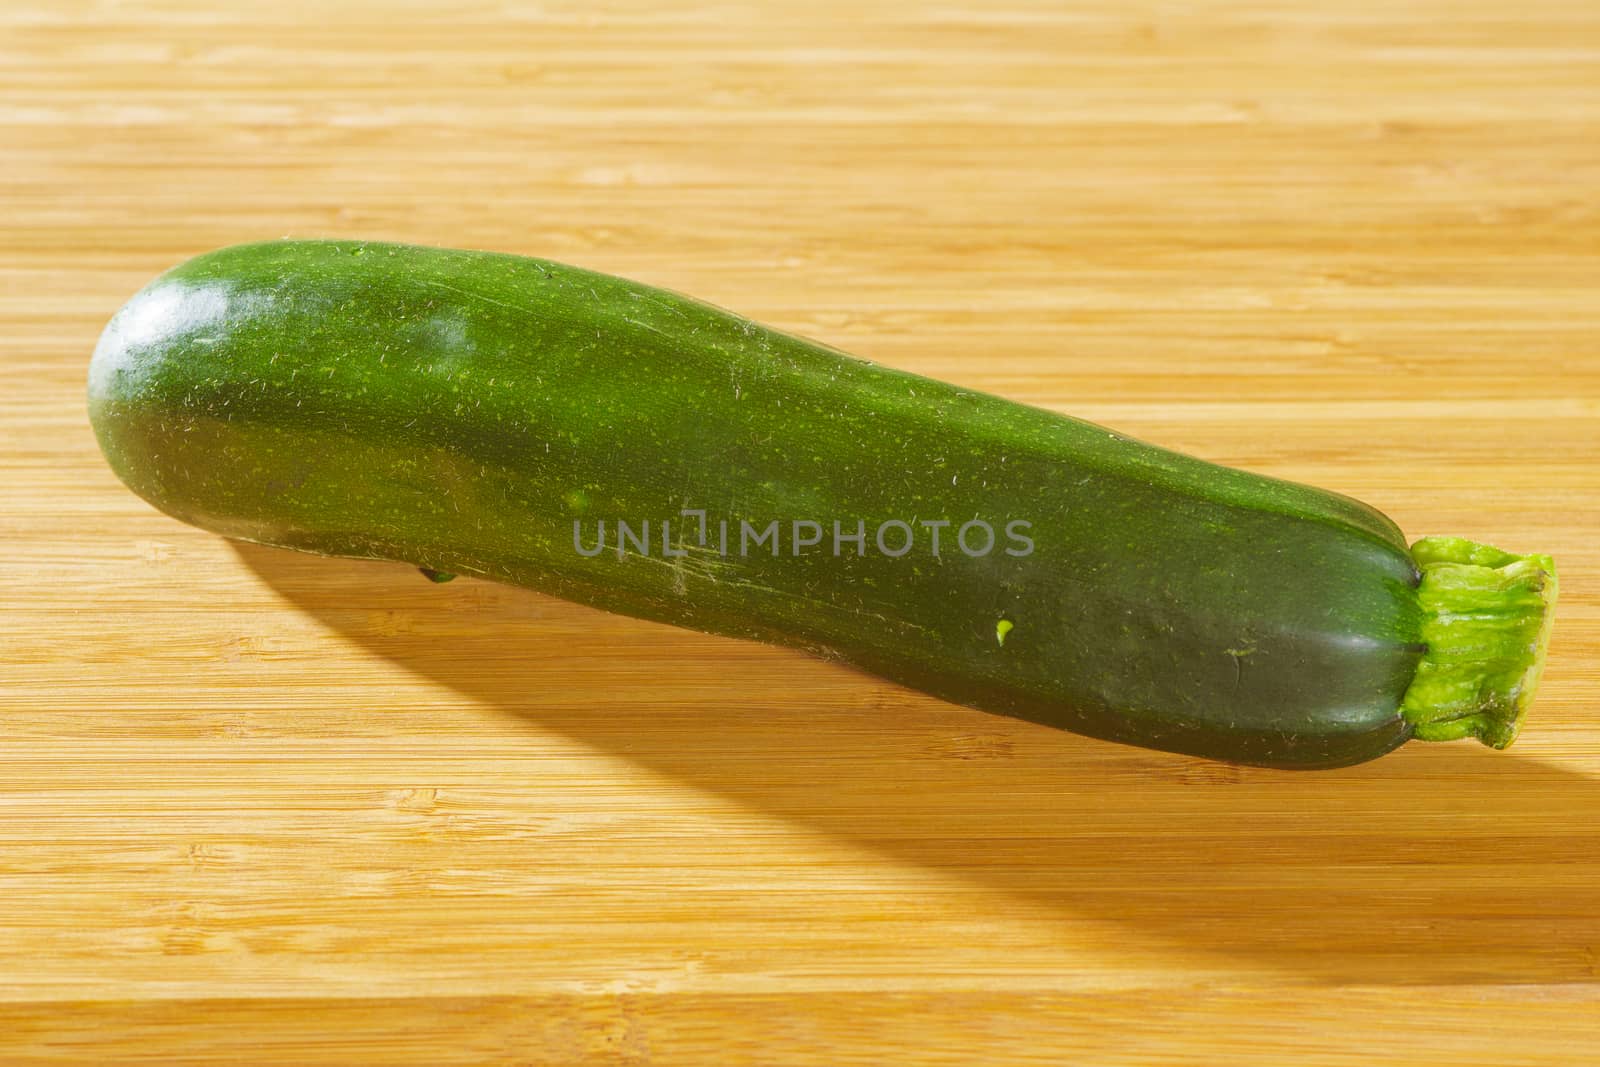 Zucchini on a wooden background